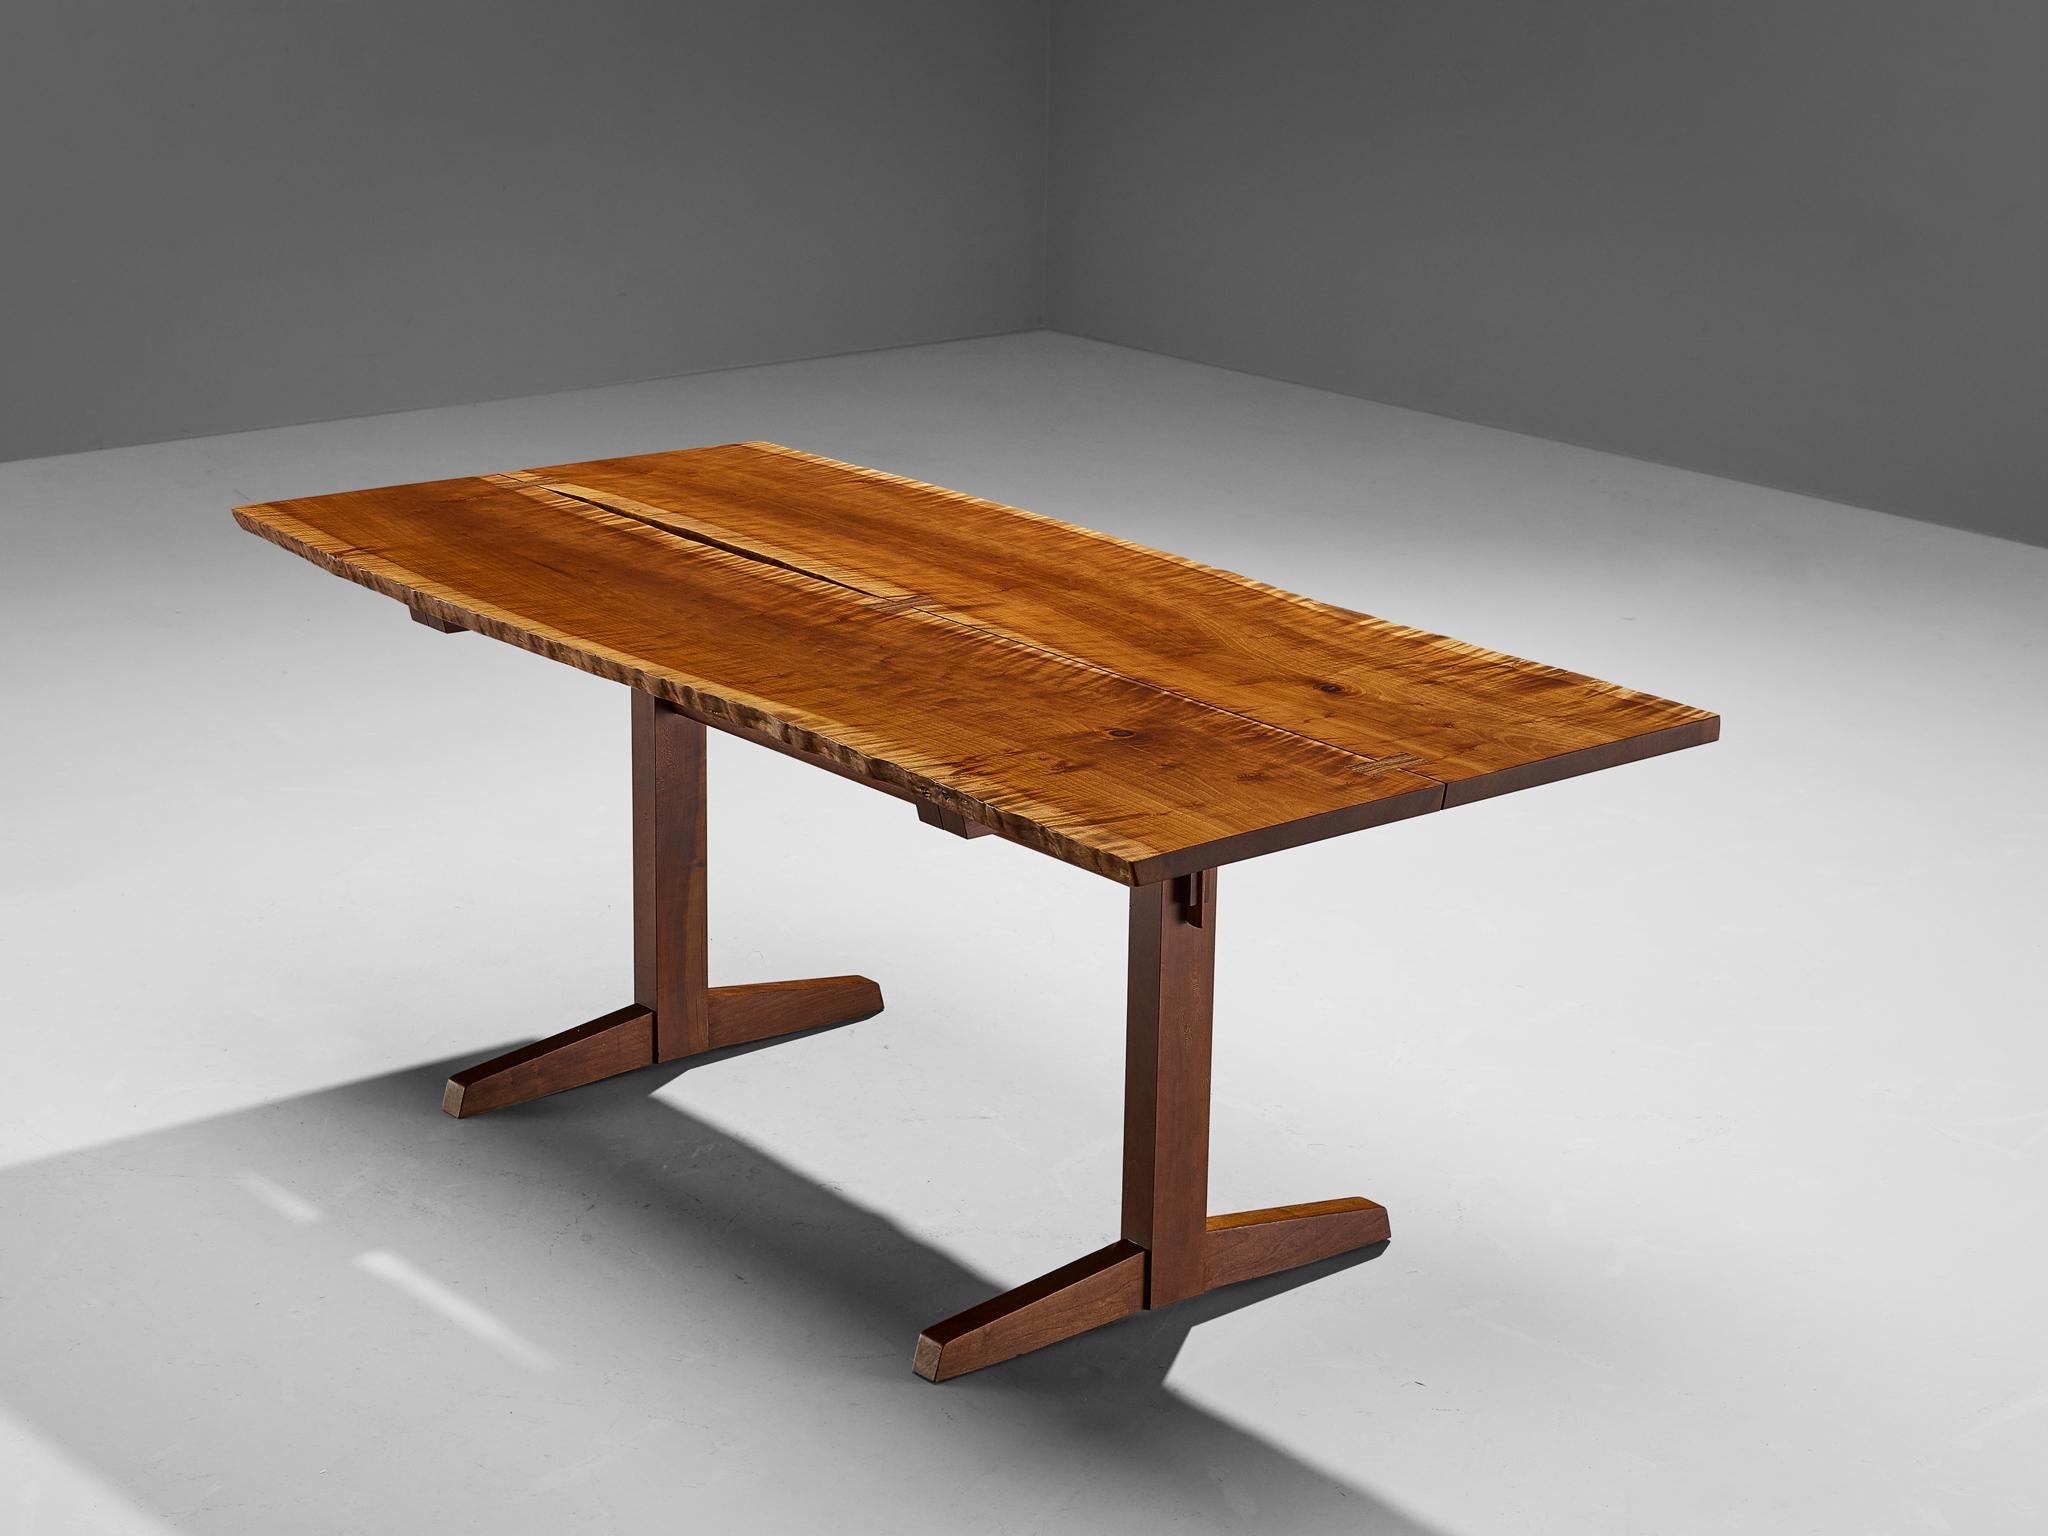 George Nakashima for George Nakashima Studio, boat-shaped ‘trestle’ dining table, cherry, rosewood, United States, 1982

This exquisite dining table was designed by George Nakashima and created in his studio in New Hope, Pennsylvania. American